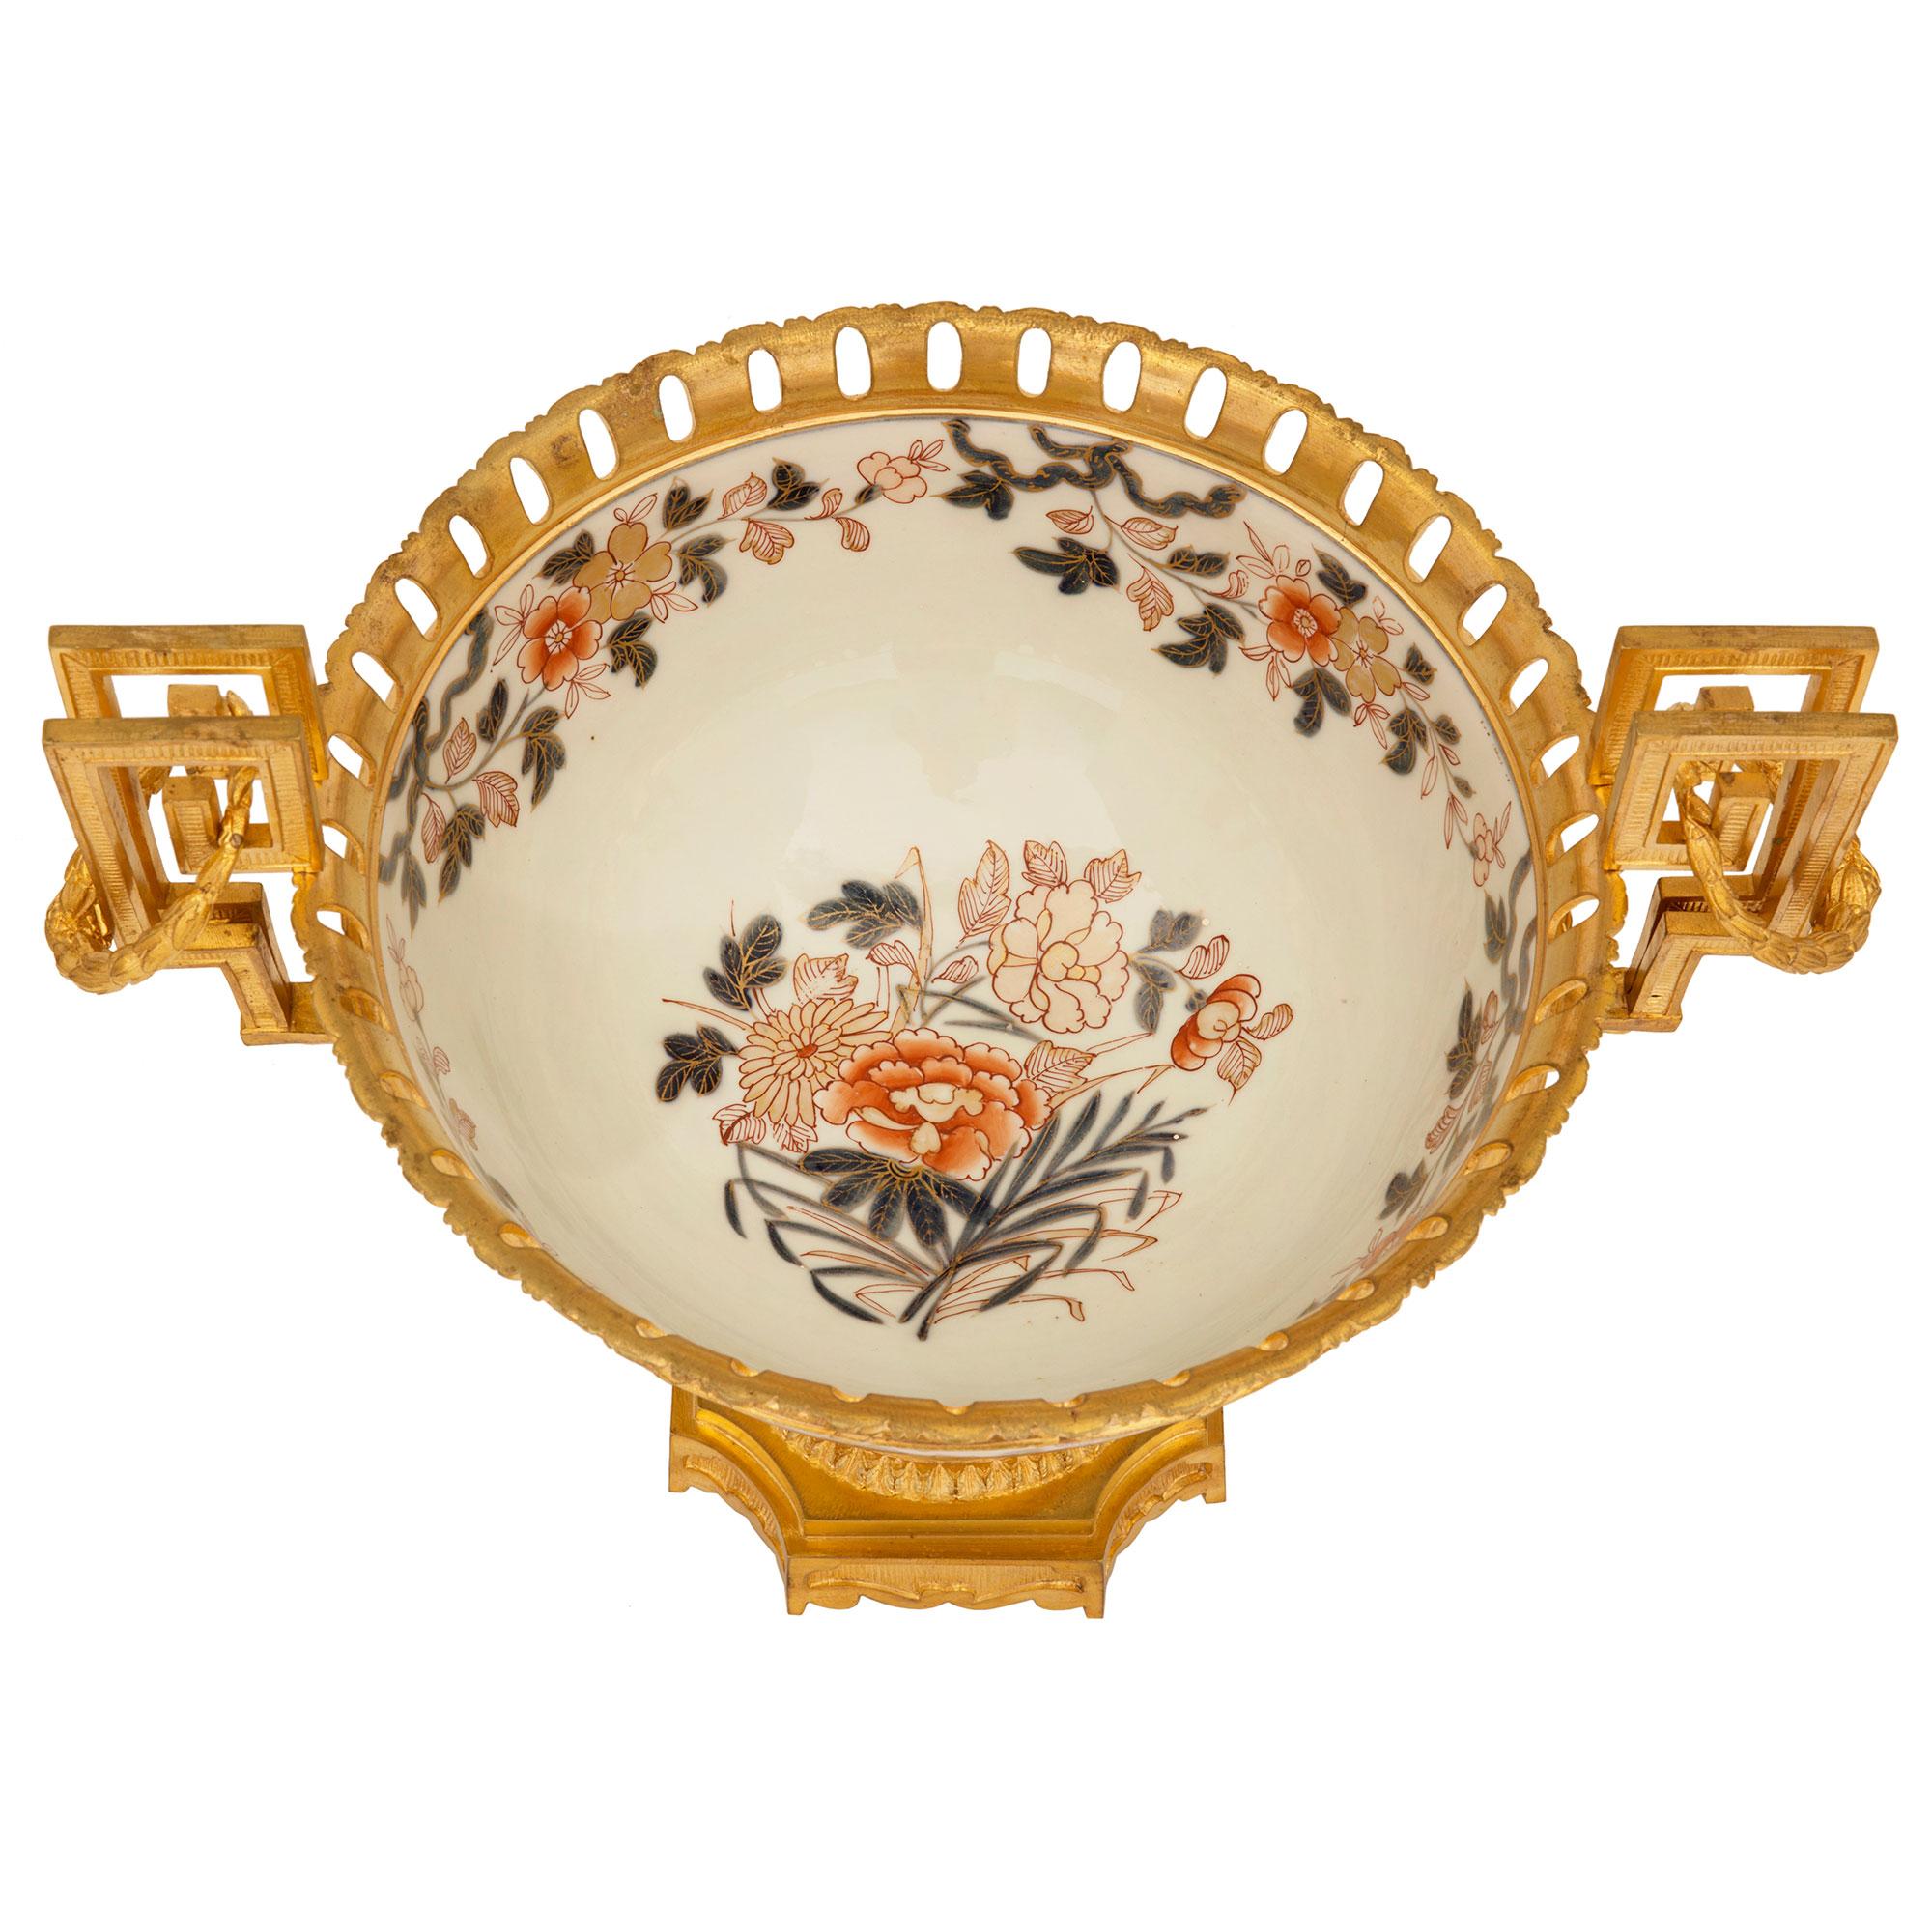 An elegant French and Asian collaboration 19th century Louis XVI st. ormolu and Imari porcelain centerpiece bowl. The centerpiece is raised by a beautiful square ormolu base with concave corners and decorated with lovely recessed fluted designs. The